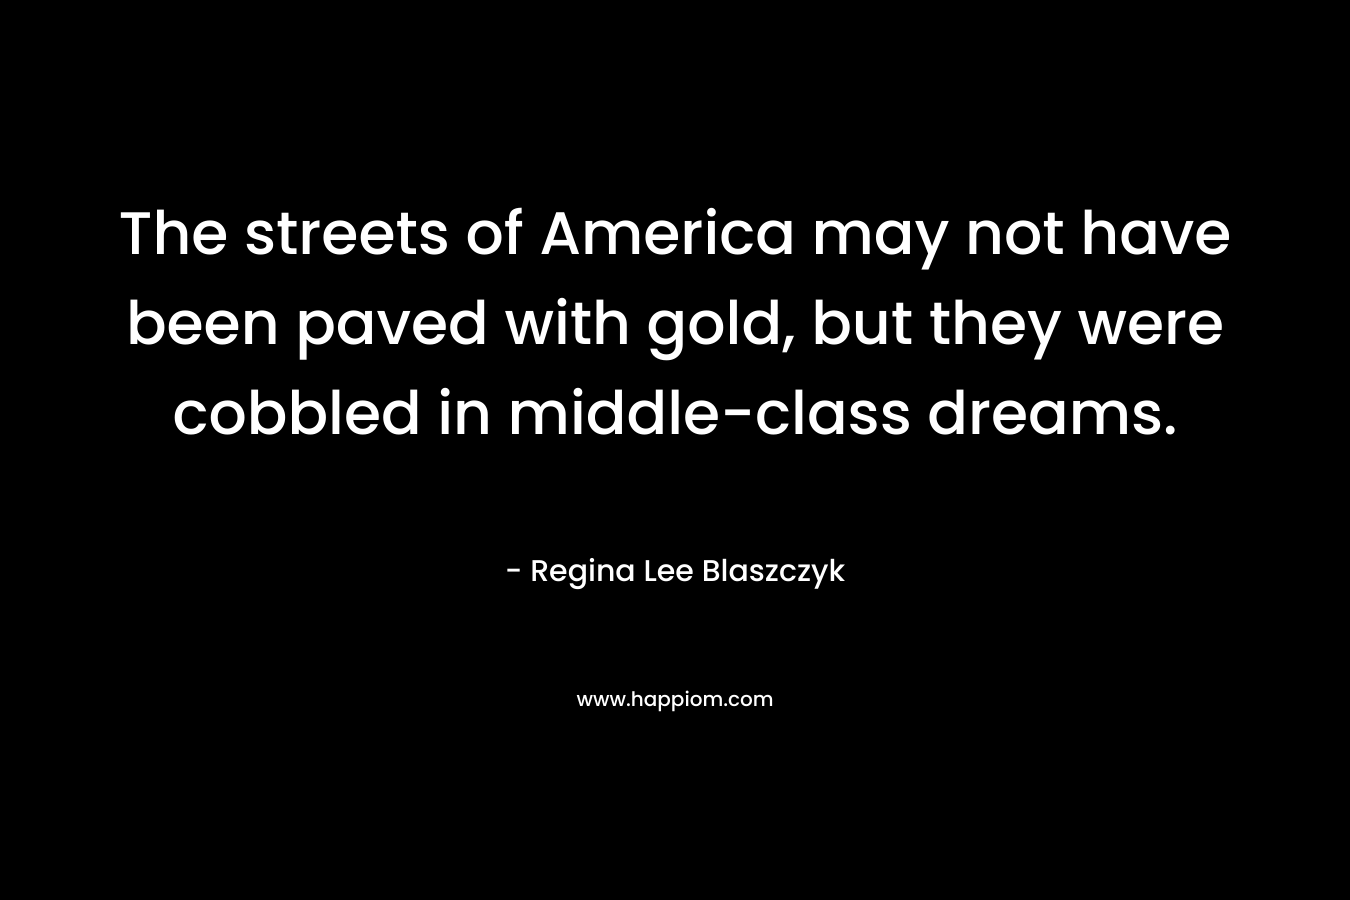 The streets of America may not have been paved with gold, but they were cobbled in middle-class dreams. – Regina Lee Blaszczyk